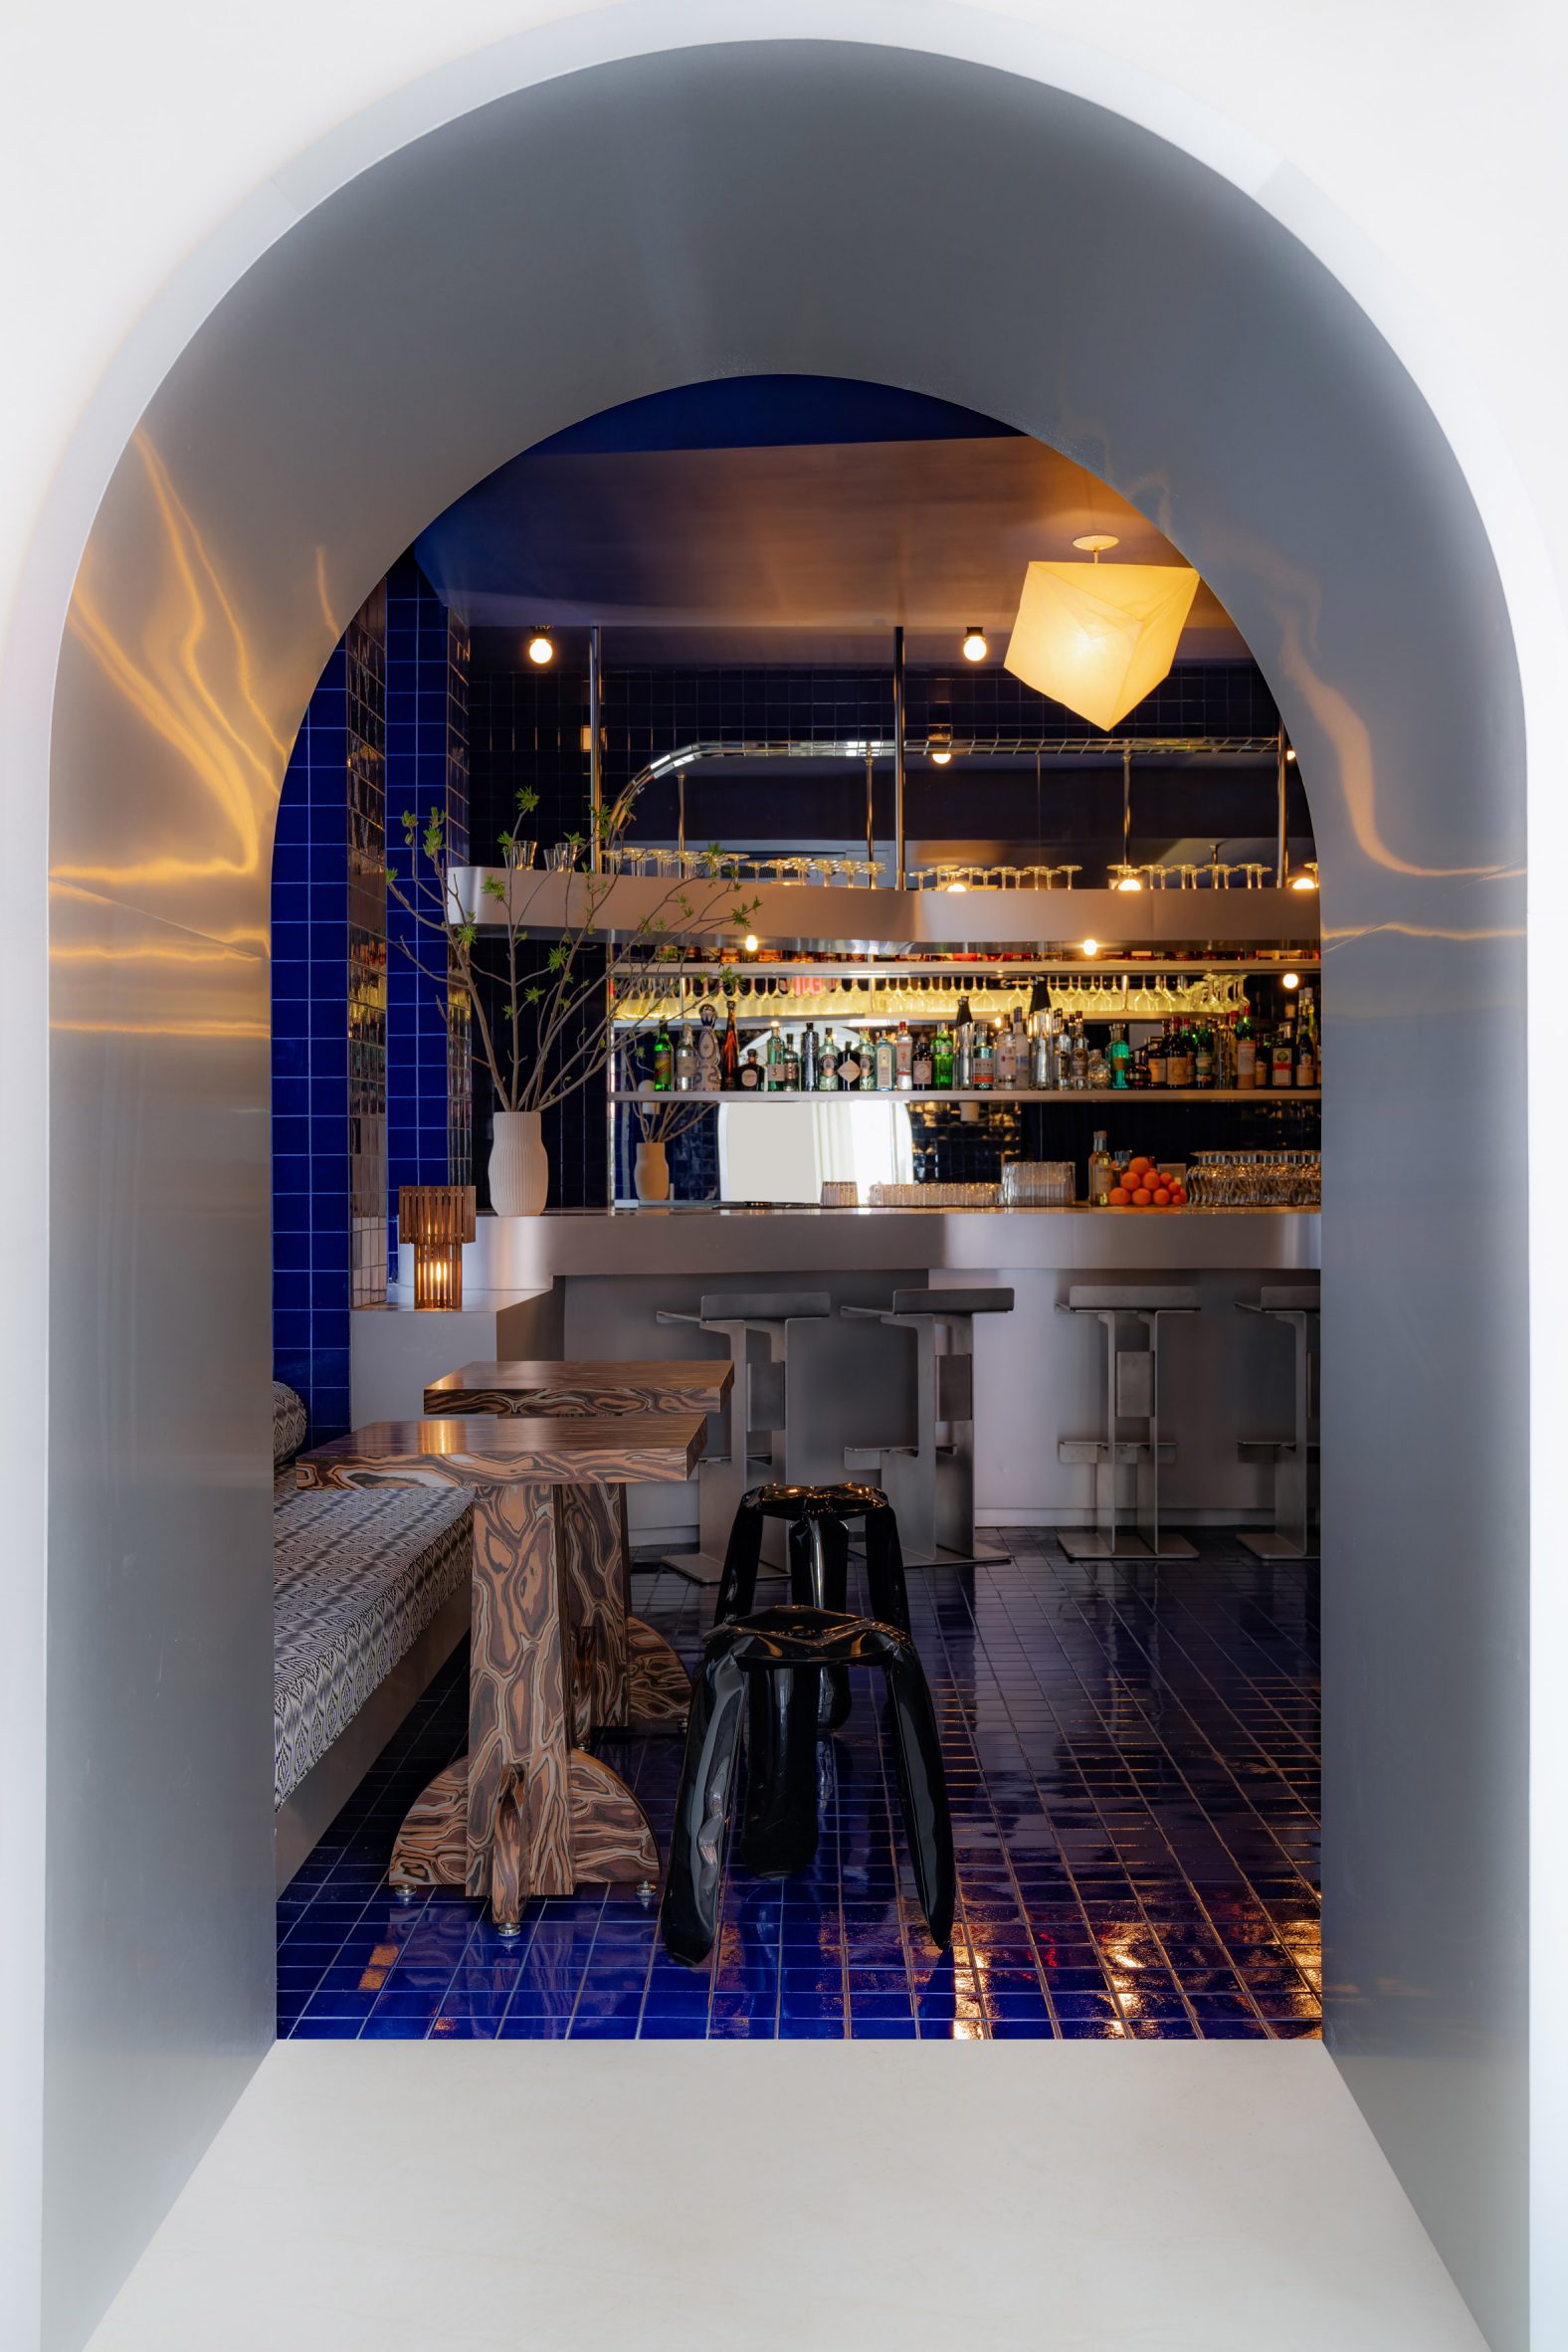 Arched opening leading into a bar area lined with cobalt blue tiles